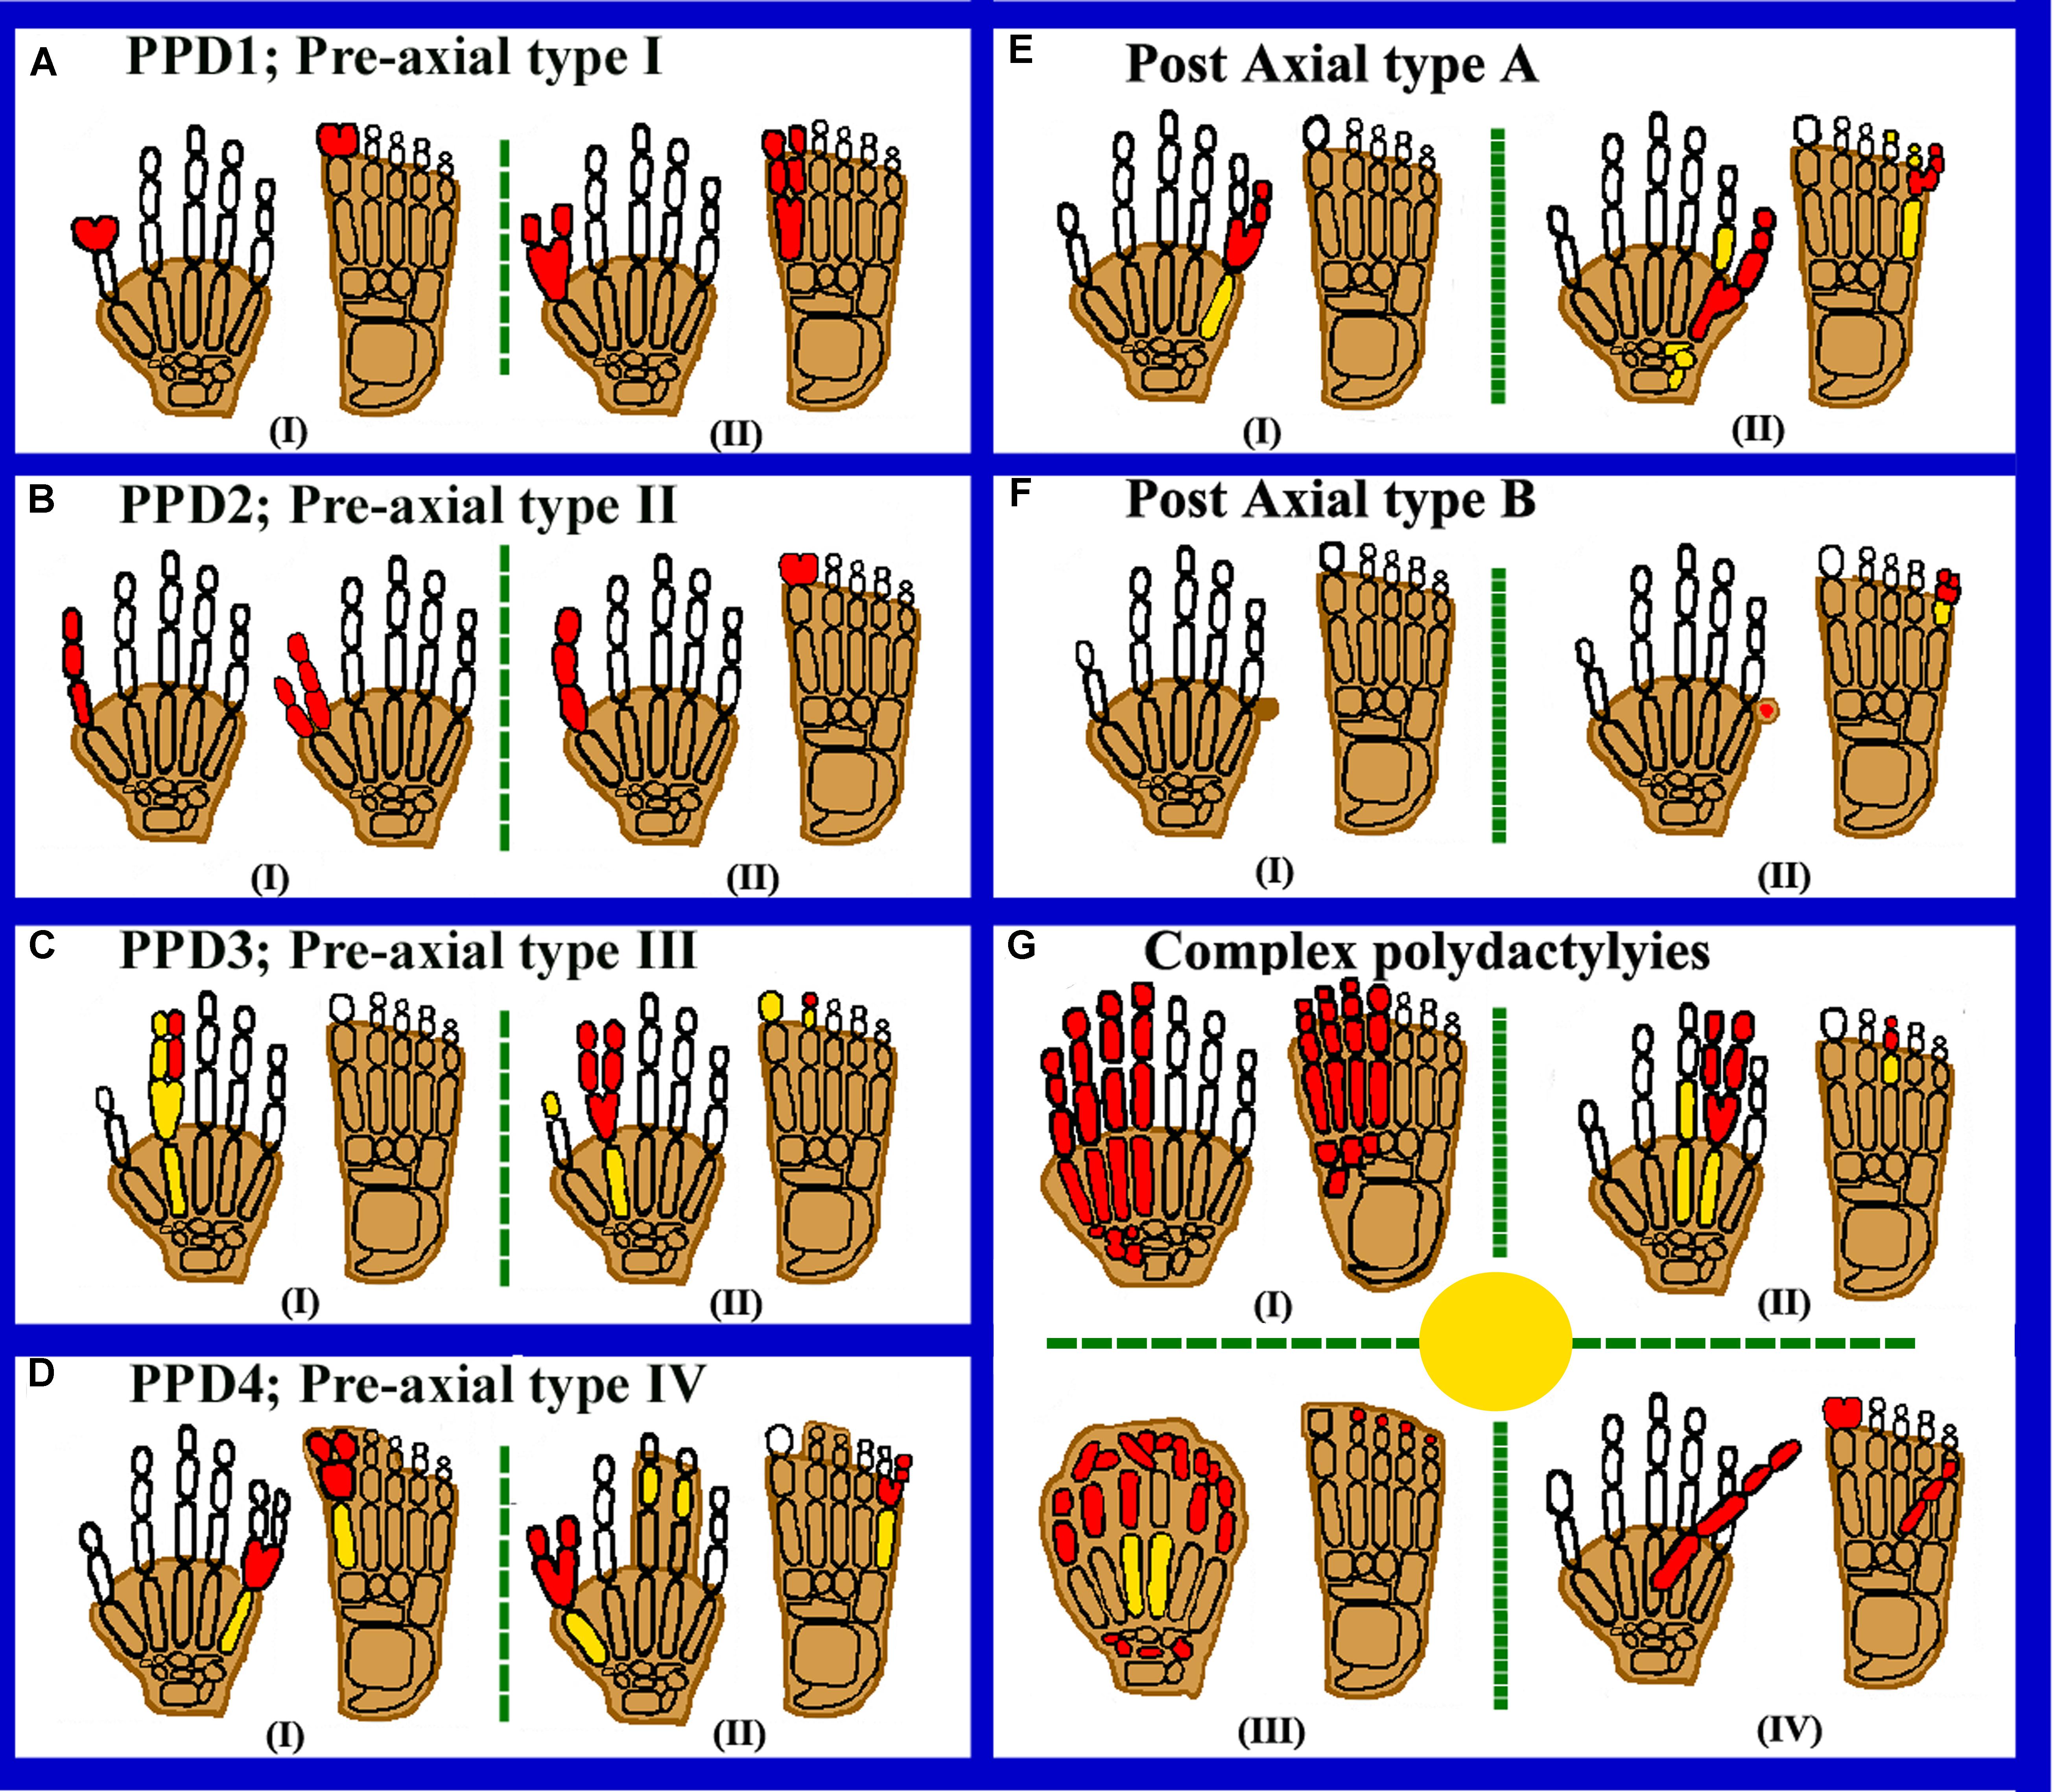 Frontiers  Clinical Genetics of Polydactyly: An Updated Review